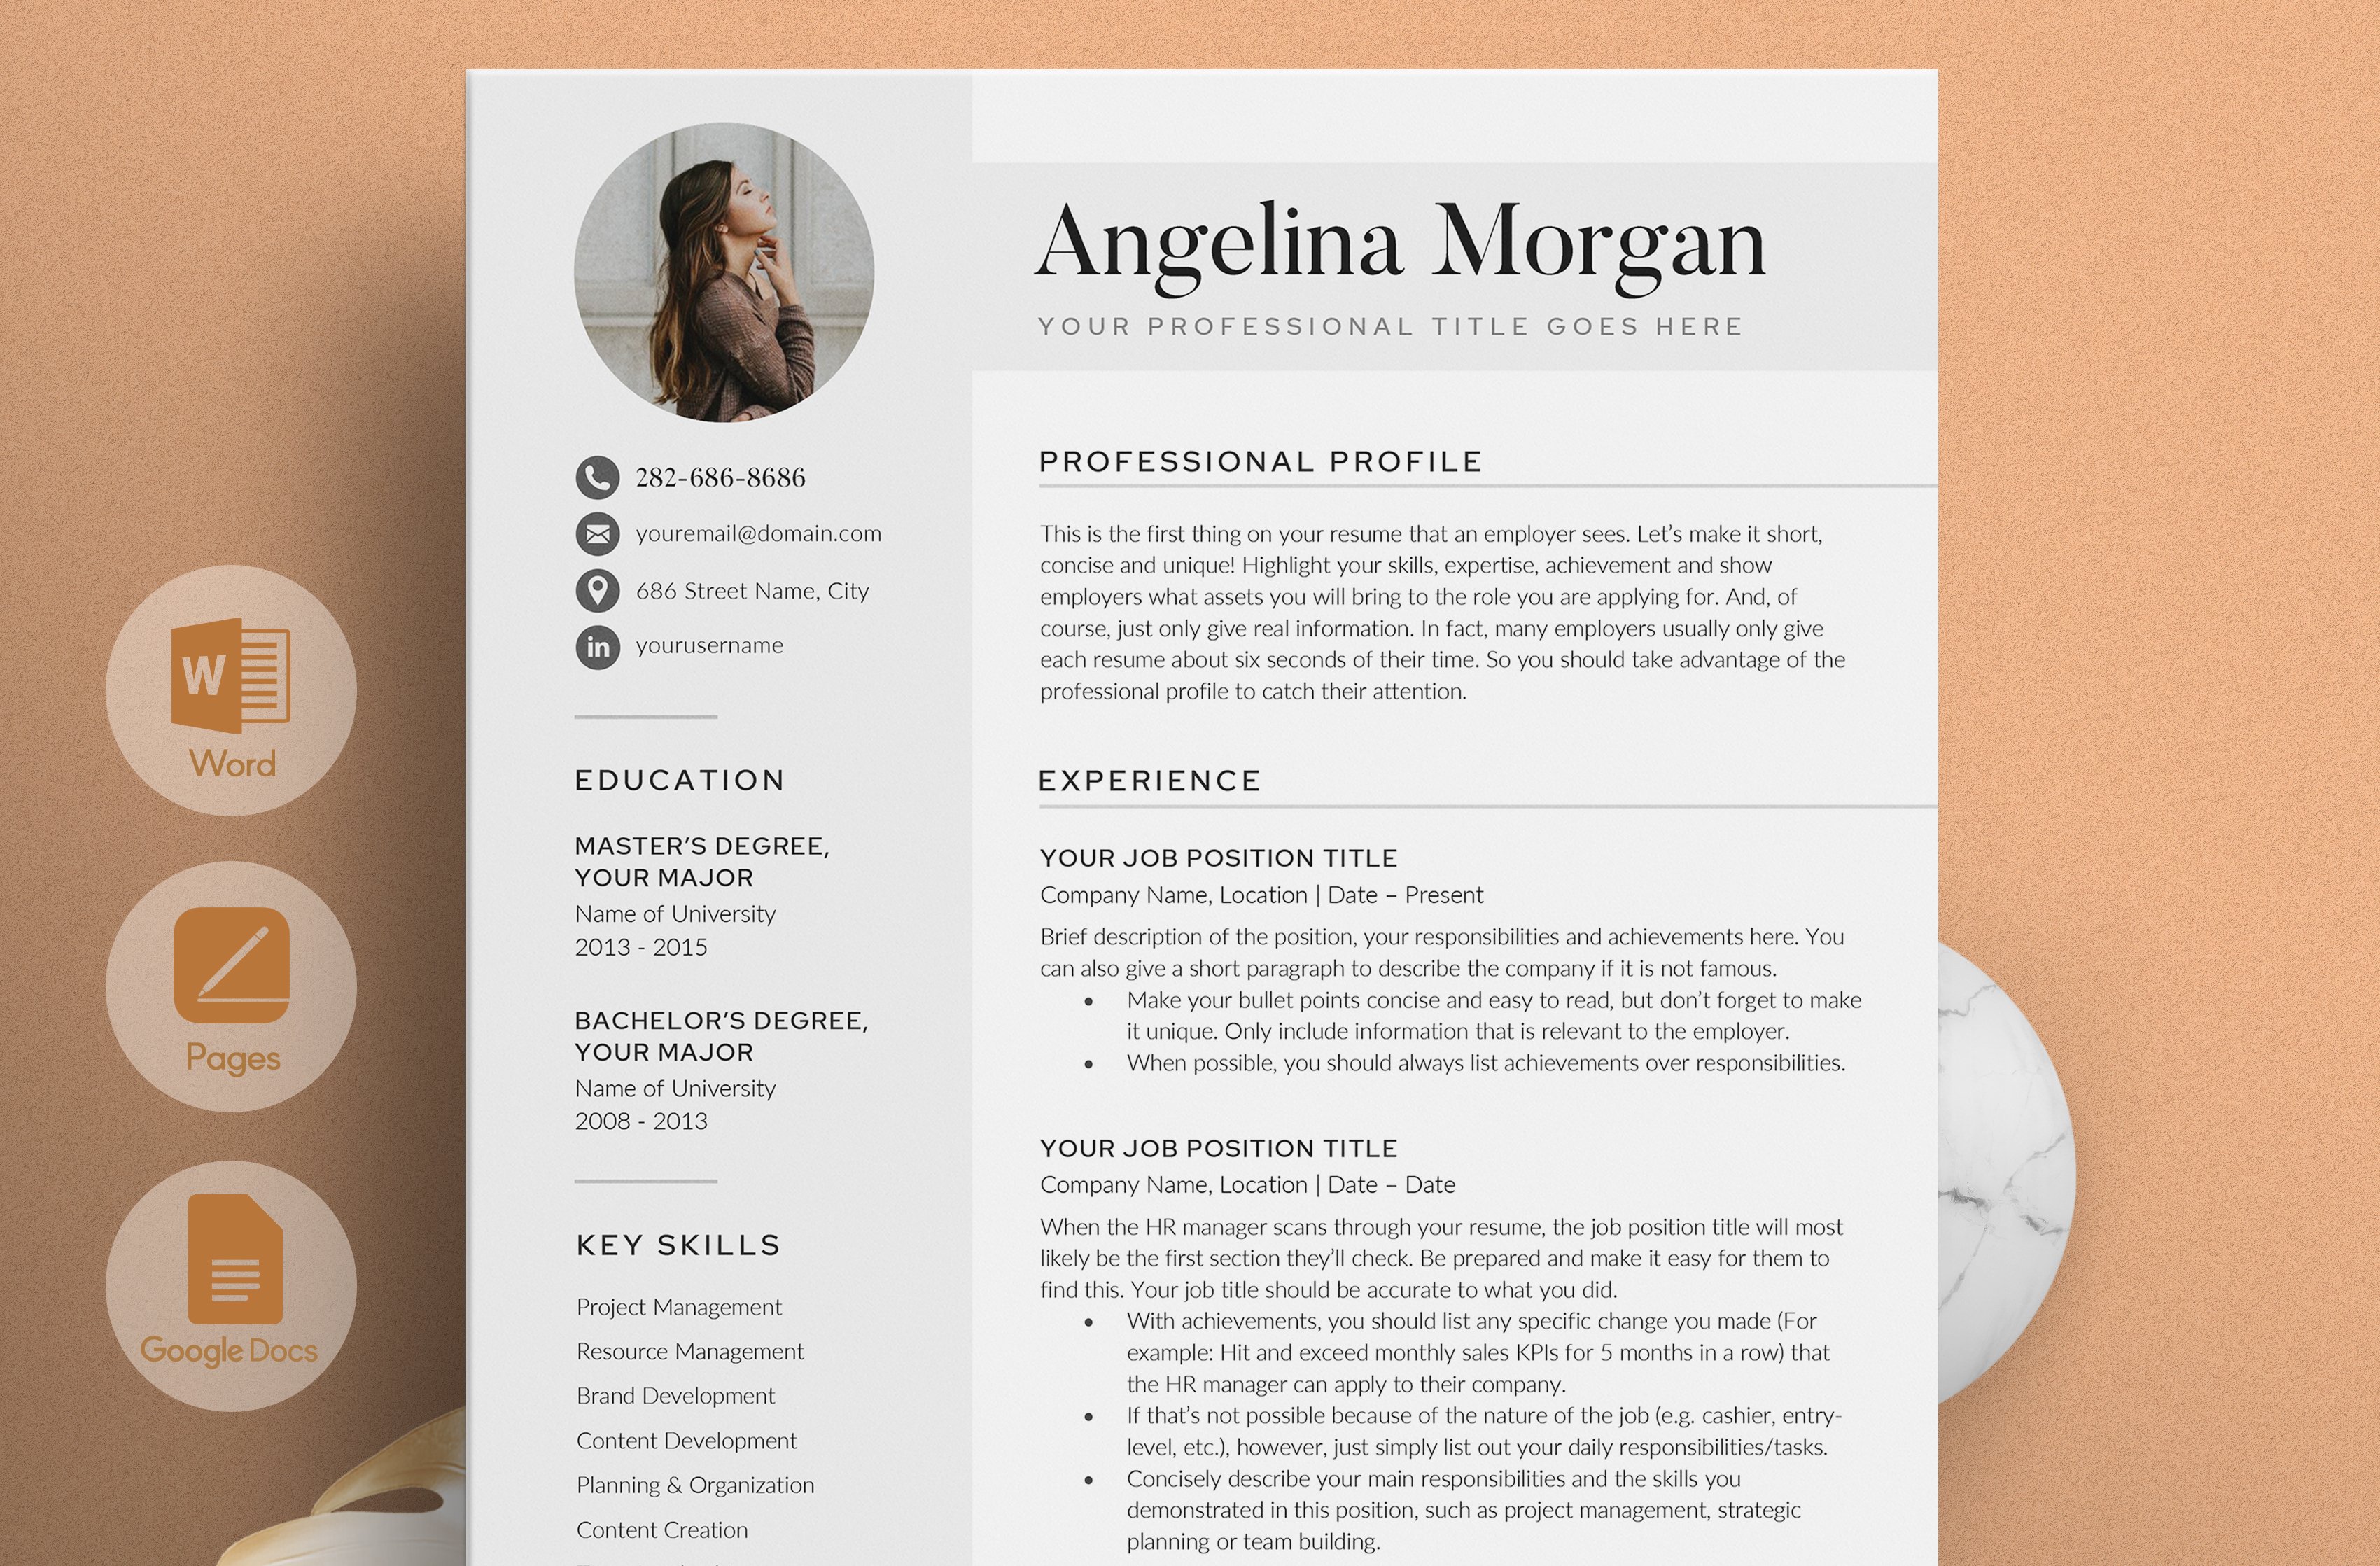 Resume/CV - The Angel cover image.